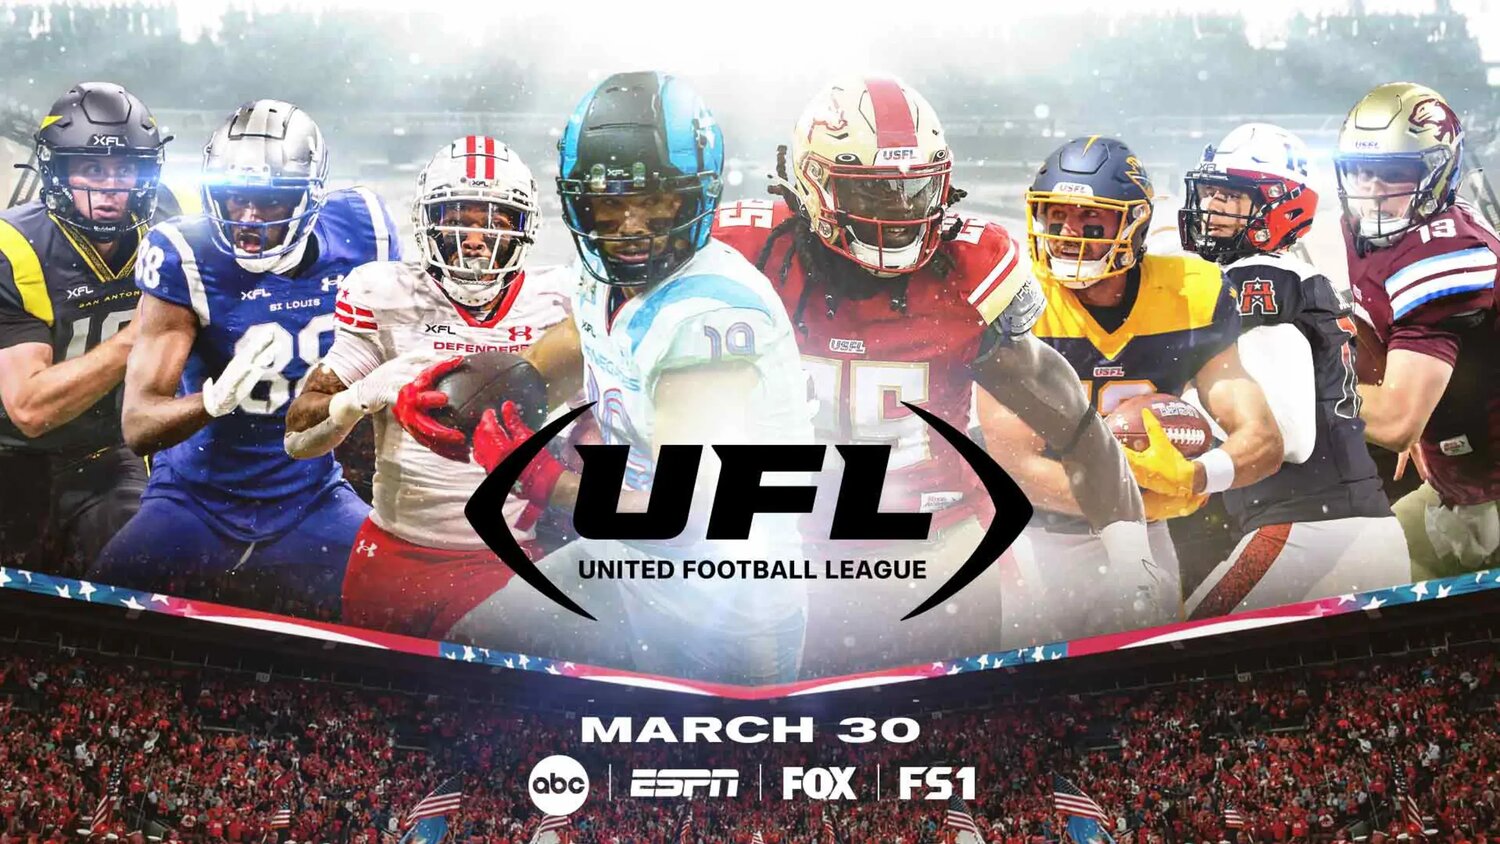 United Football League completes dispersal draft process after XFL